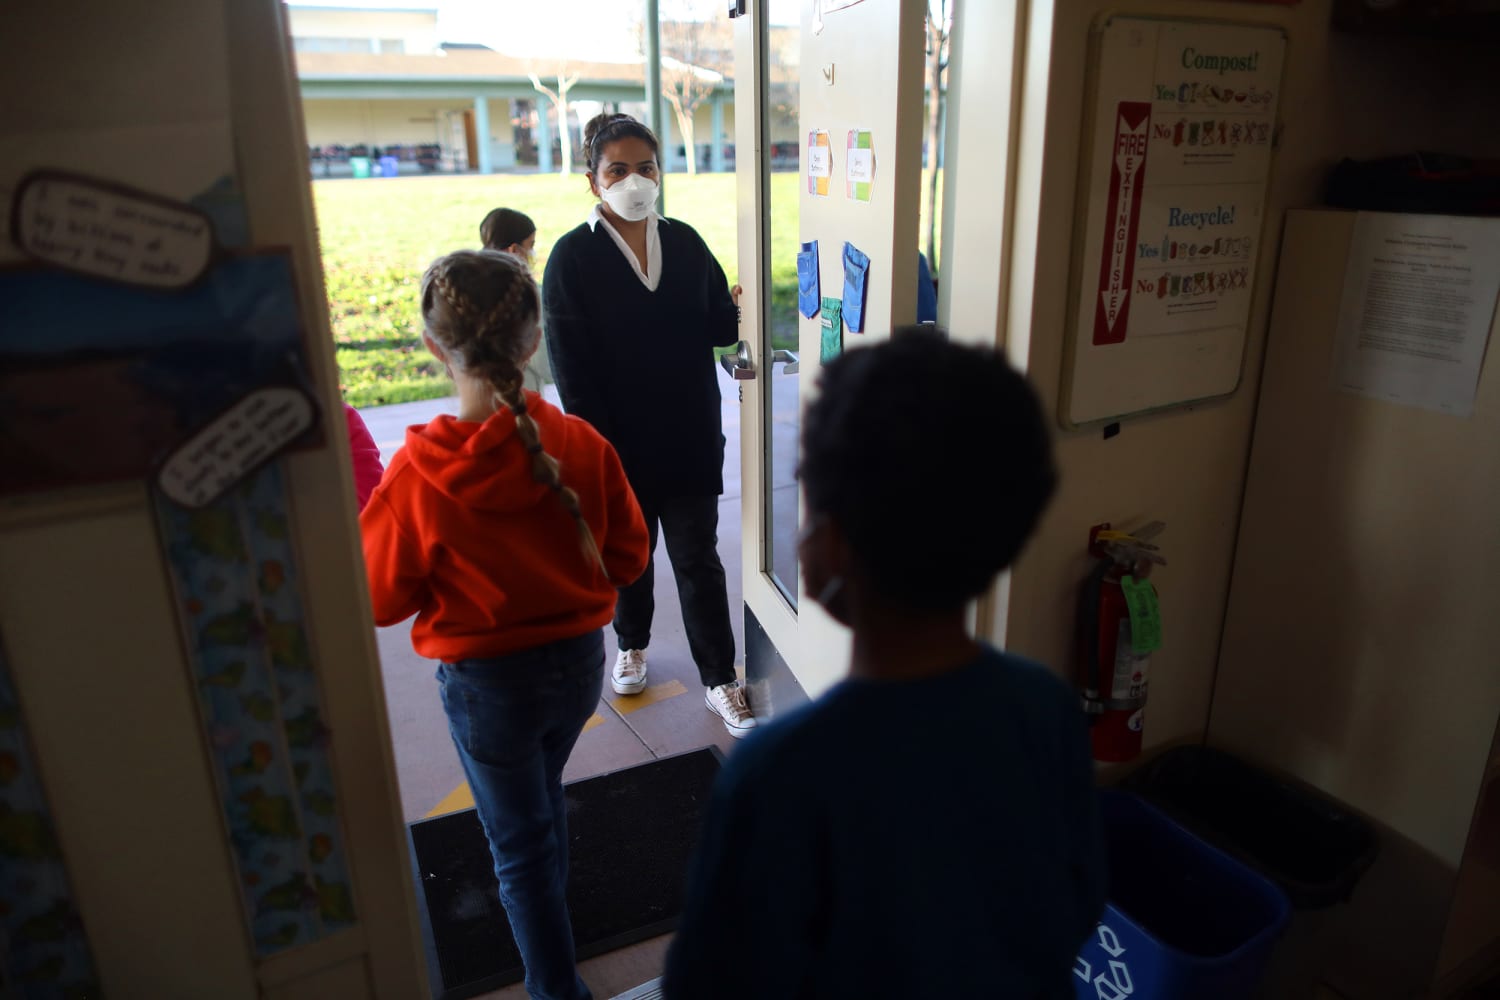 Tutors take center stage as students try to make up pandemic losses